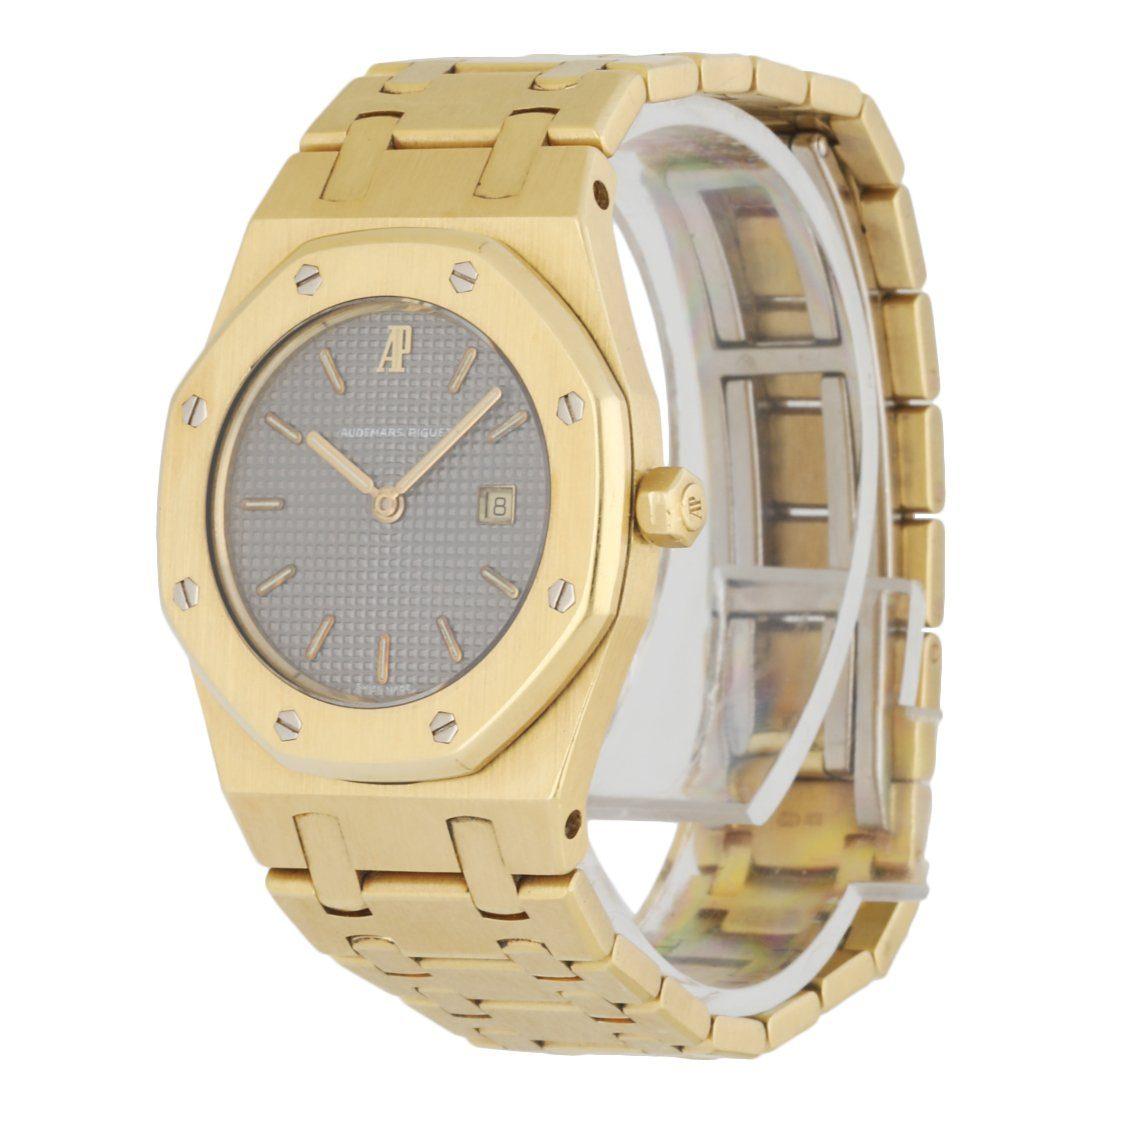 Audemars Piguet Ladies watch. 30MMÂ 18K yellow gold case withÂ OctagonÂ bezel.Â Gray dial with gold tone luminous hands and index hour marker. Date display at 3 o'clock position.Â 18K yellow goldÂ AP bracelet withÂ 18K white gold fold over clasp